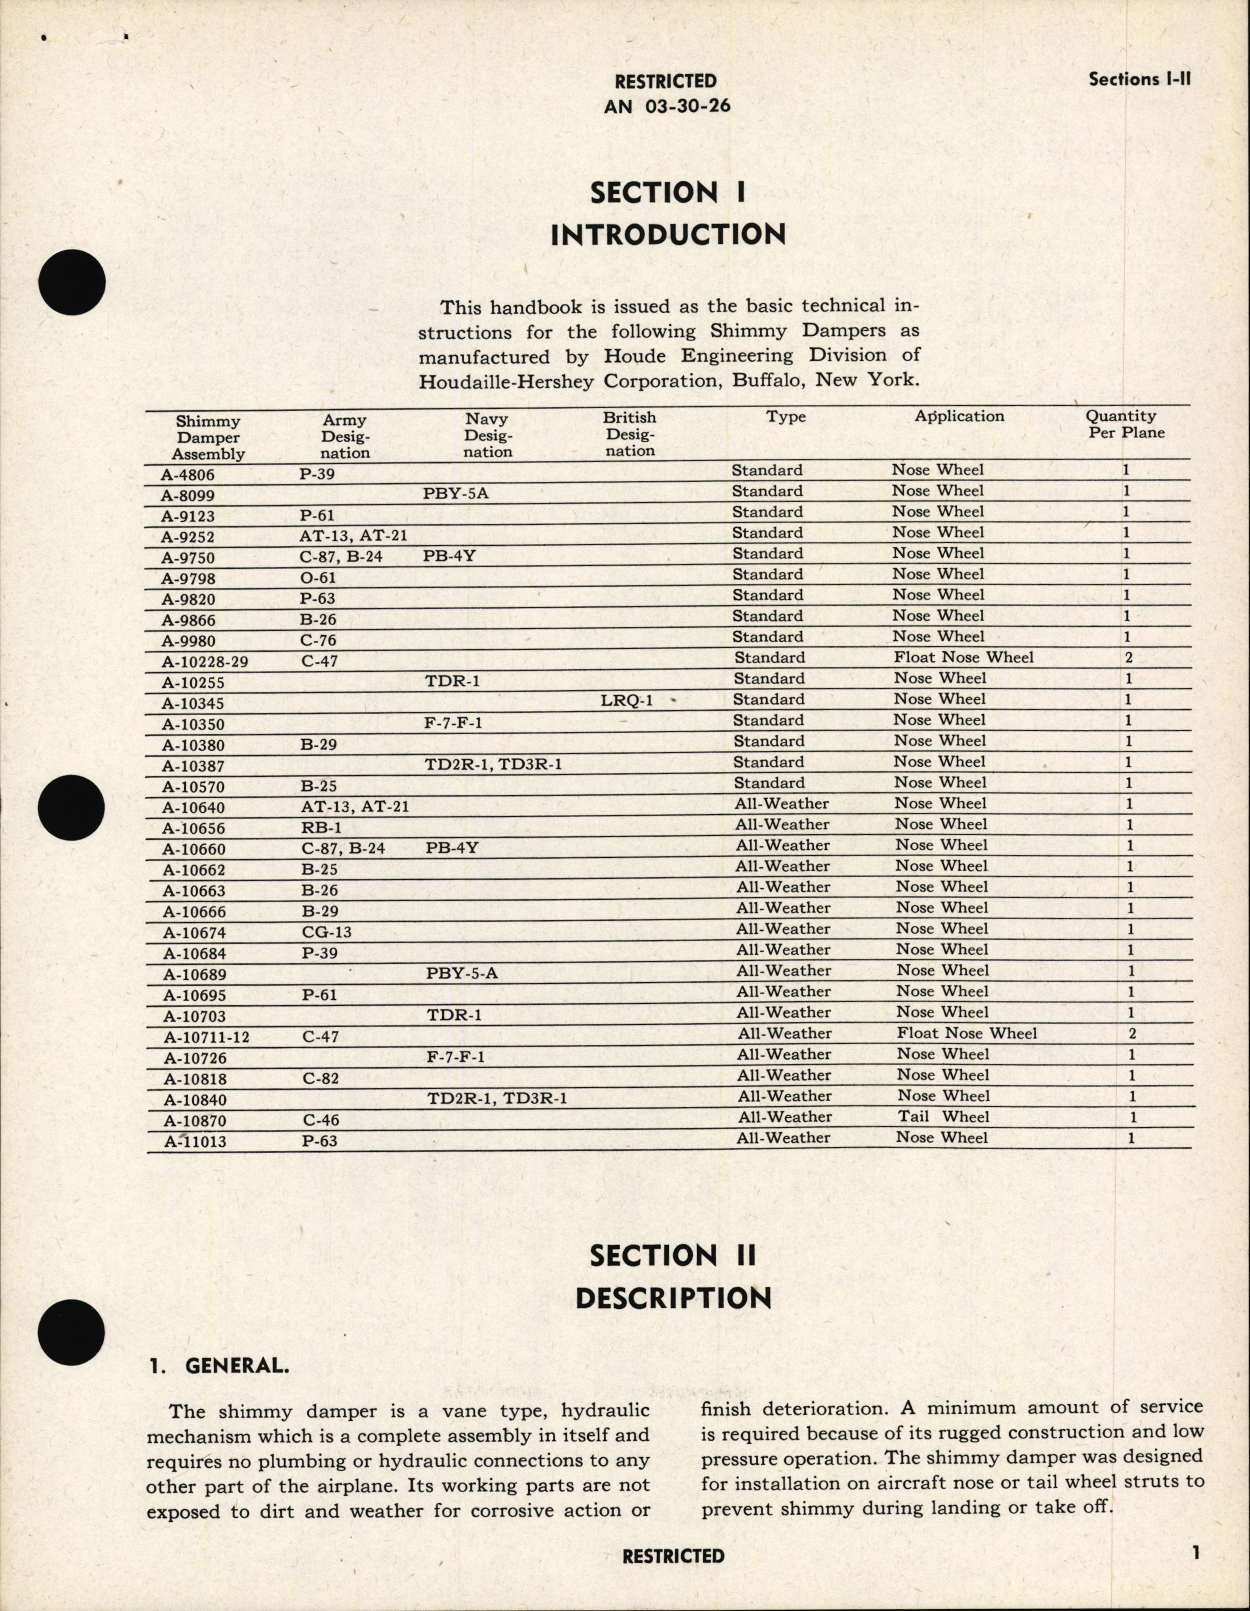 Sample page 5 from AirCorps Library document: Operation, Service and Overhaul Instructions with Parts Catalog for Shimmy Dampers